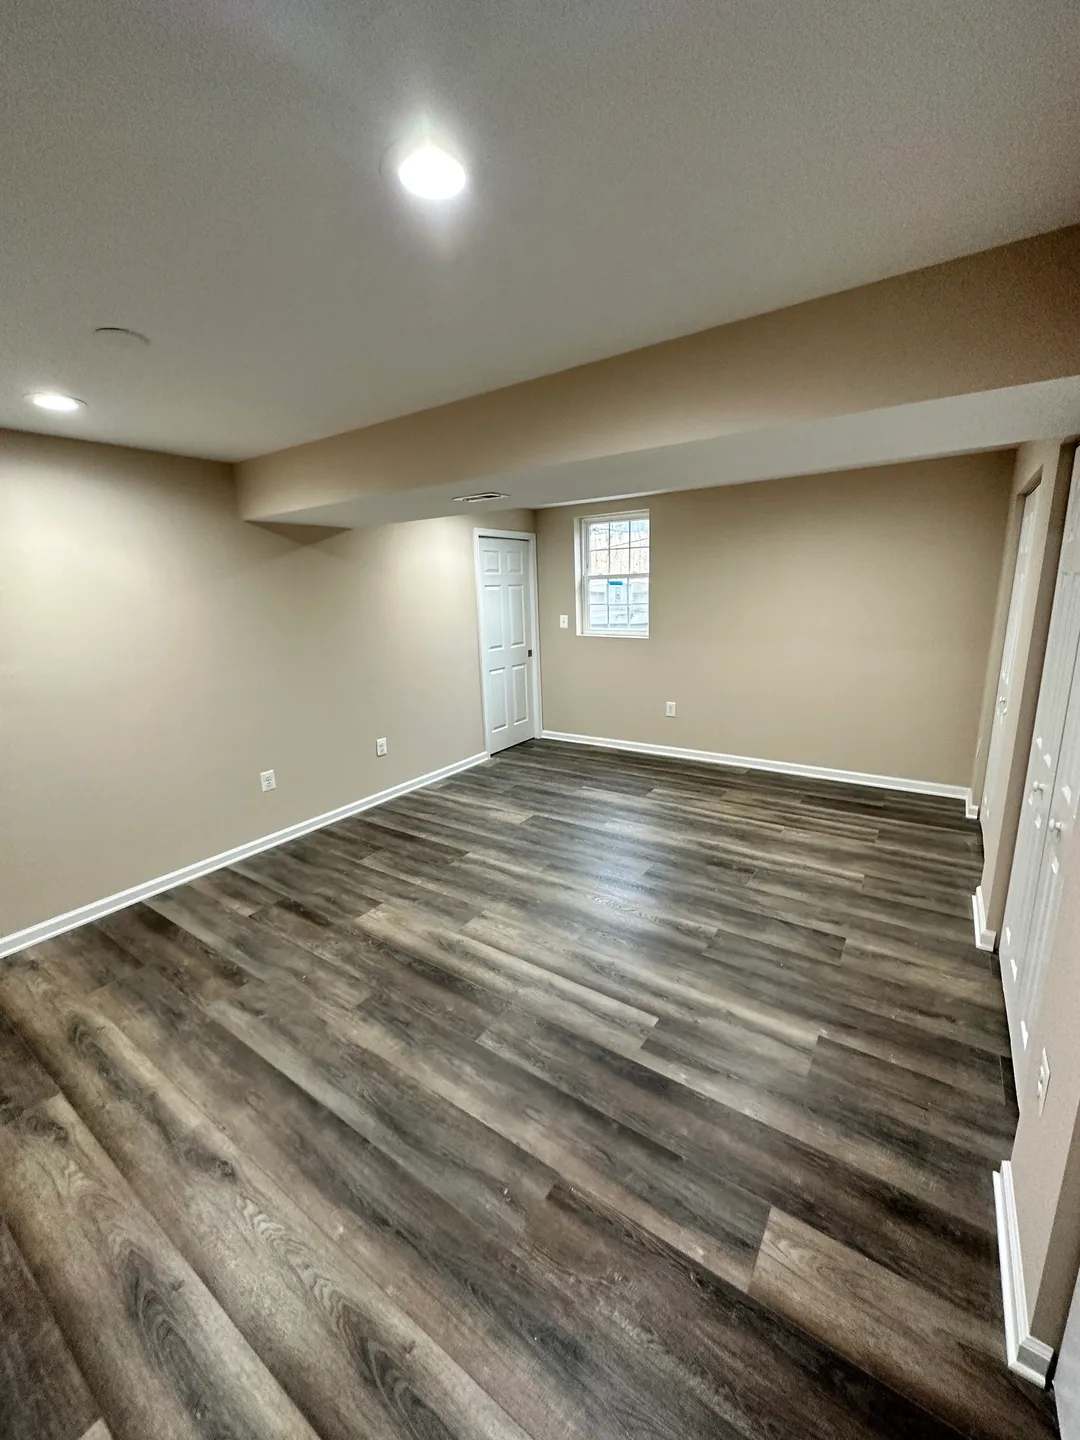 A room with wood floors and white walls.